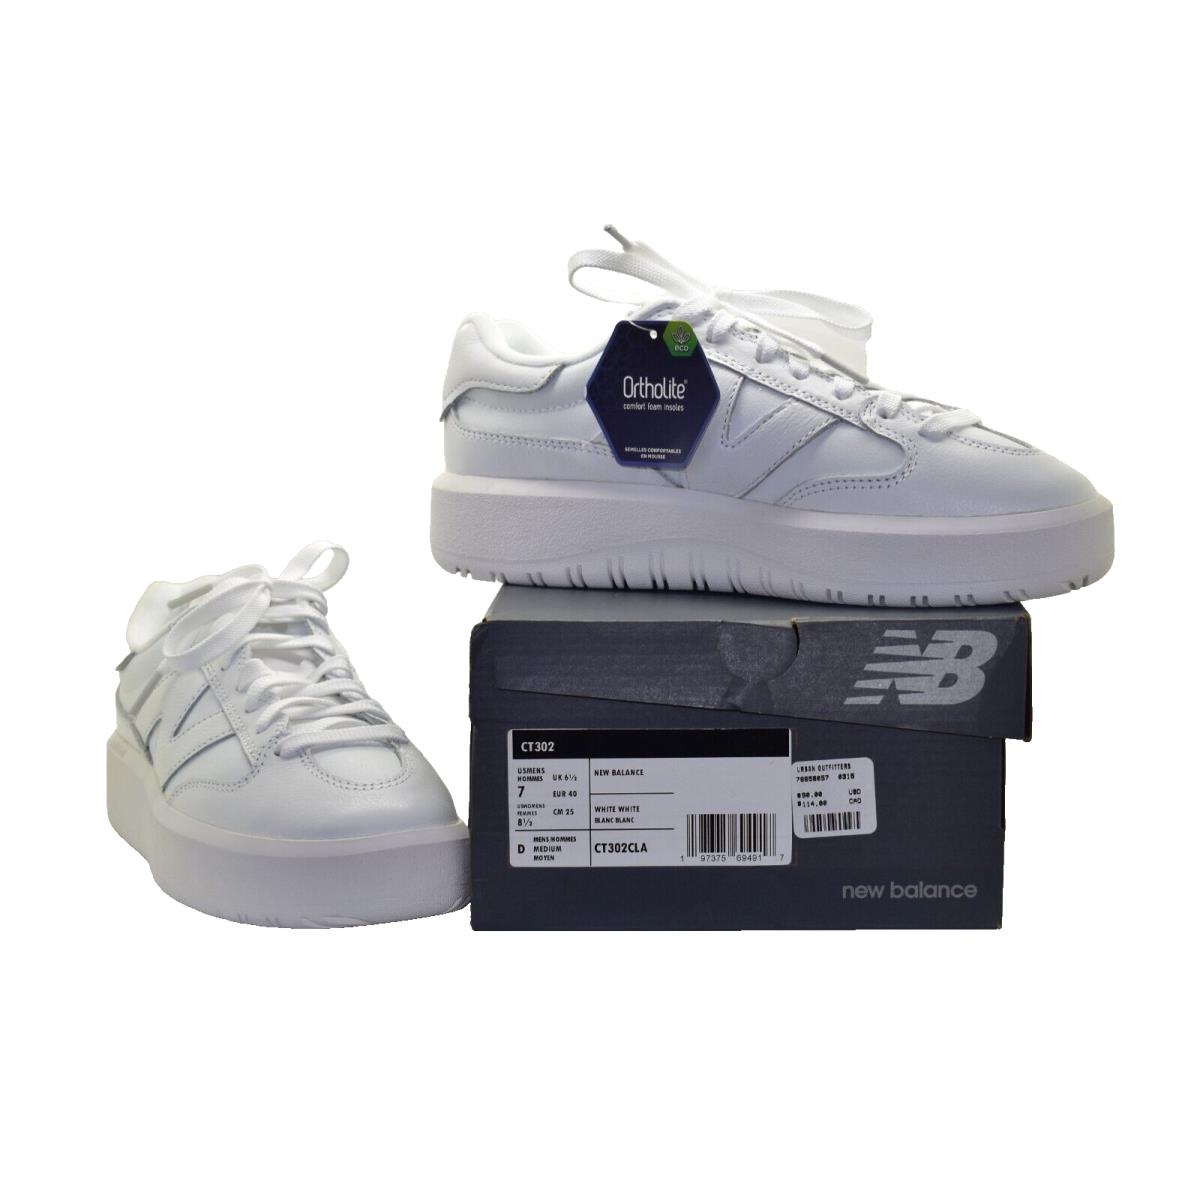 C0 New Balance Women`s White/white Leather Sneaker Shoes CT302CLA Size 8.5